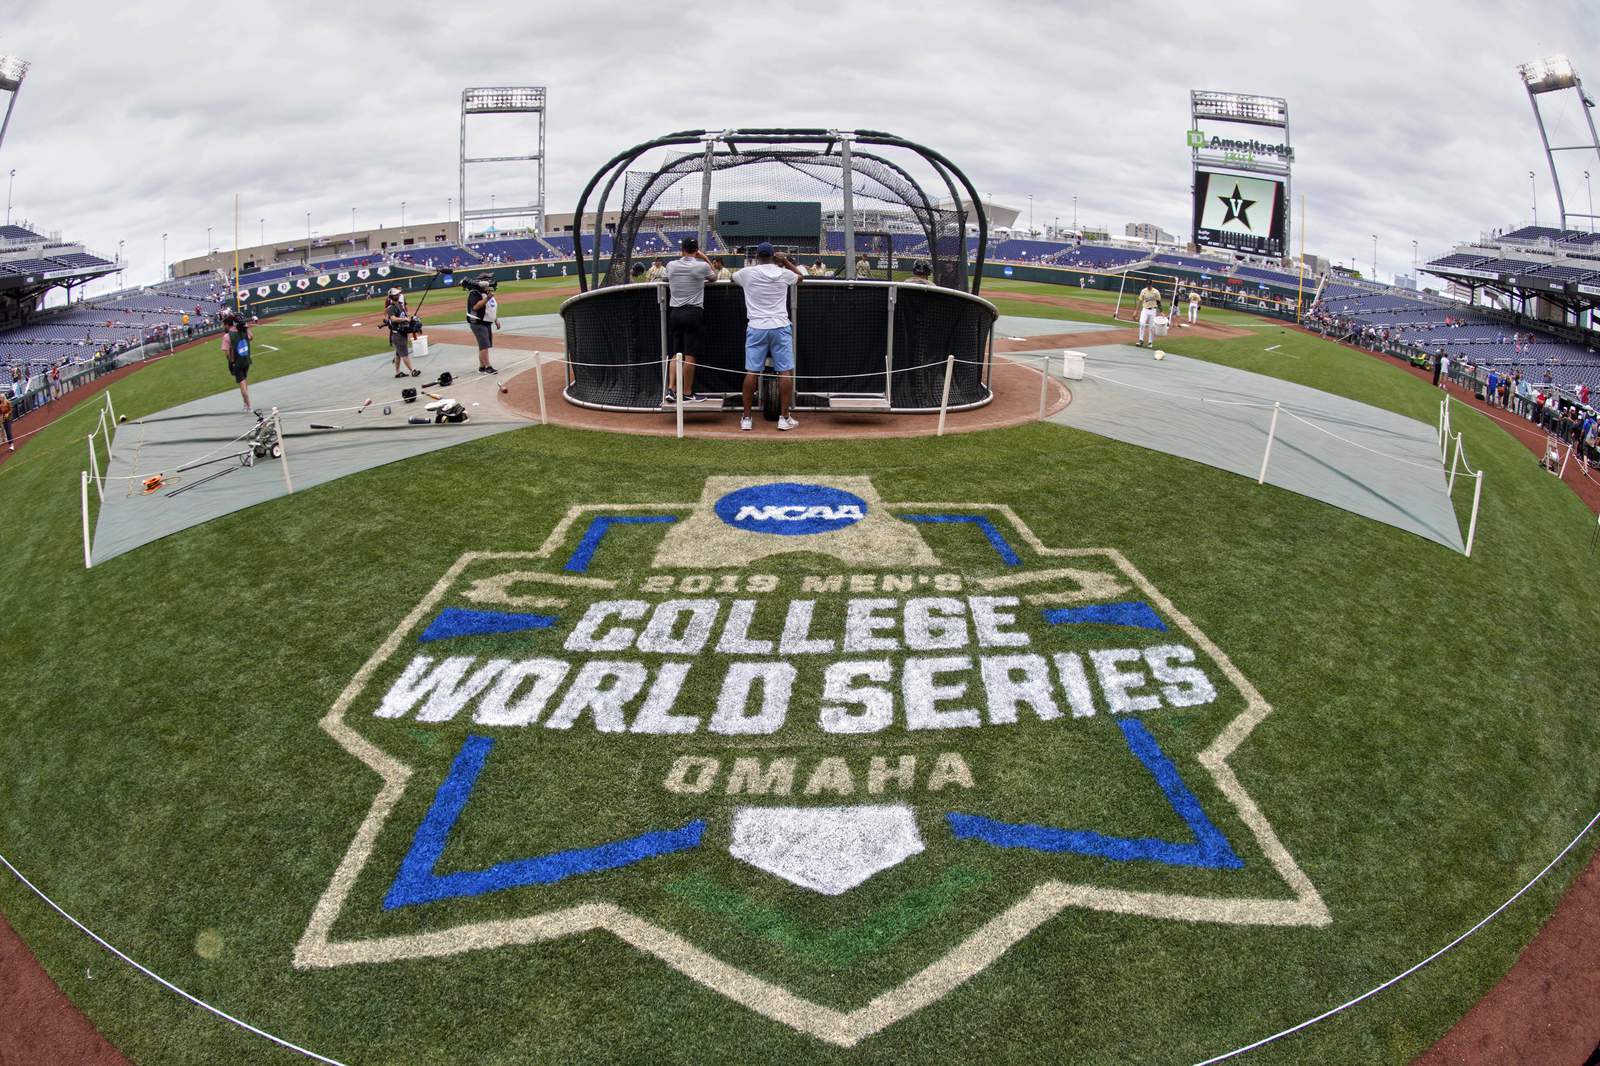 College baseball into July? Coaches say it would save money